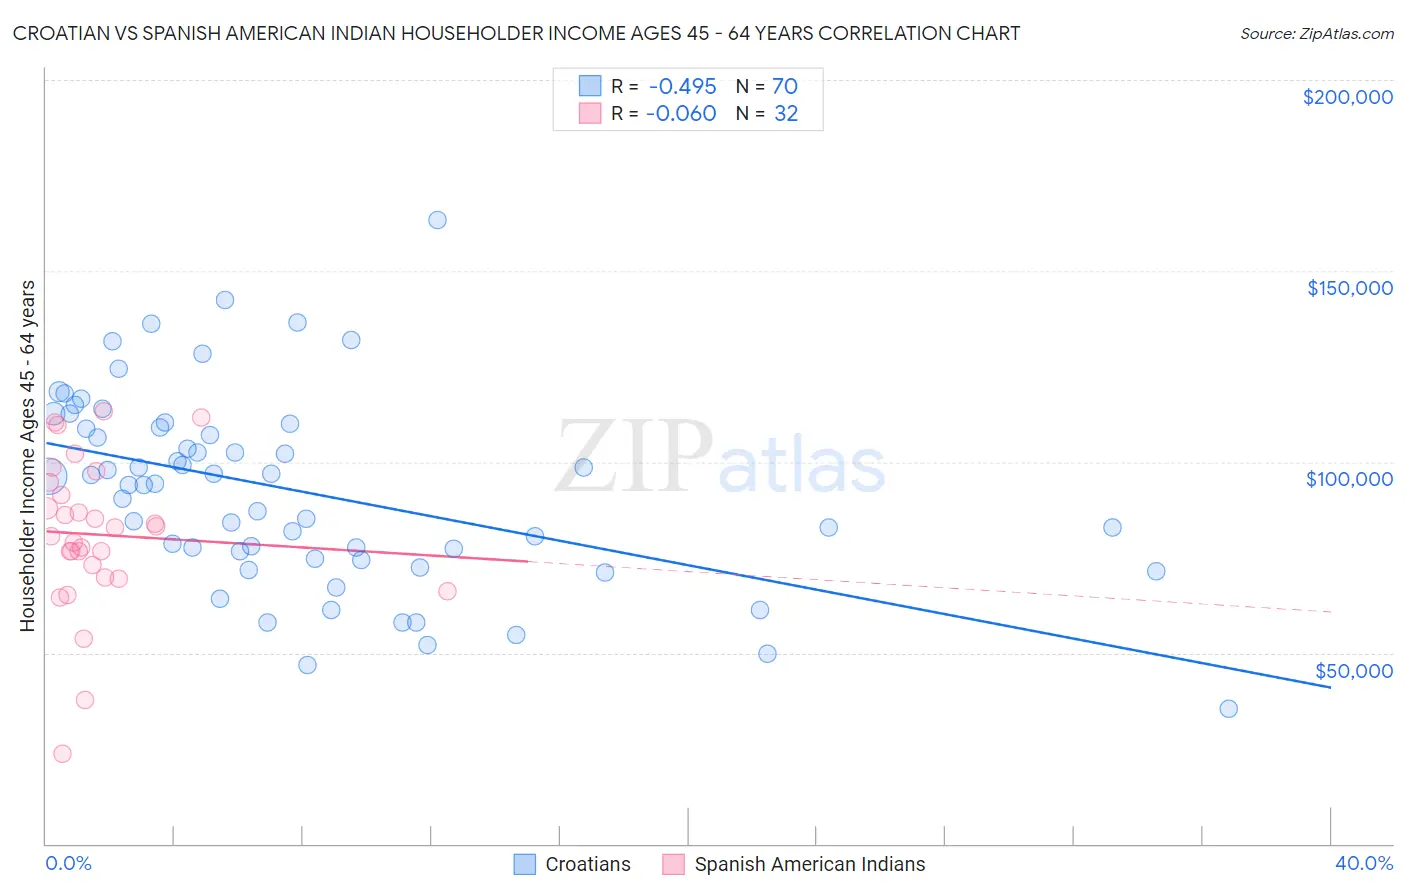 Croatian vs Spanish American Indian Householder Income Ages 45 - 64 years